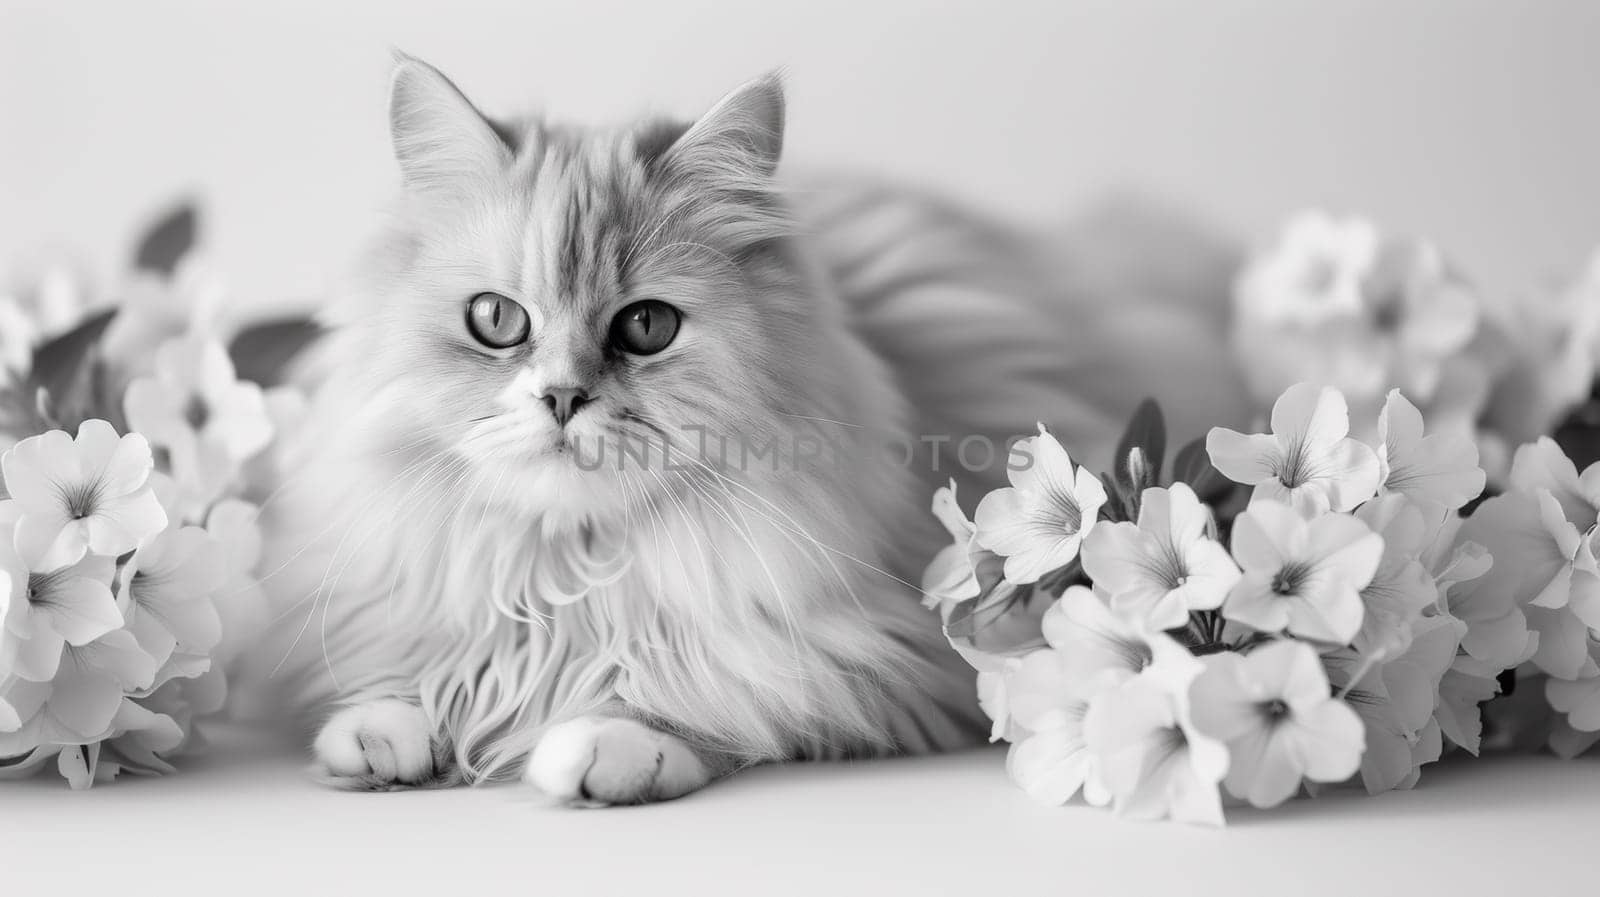 A cat sitting in a field of flowers with some white ones